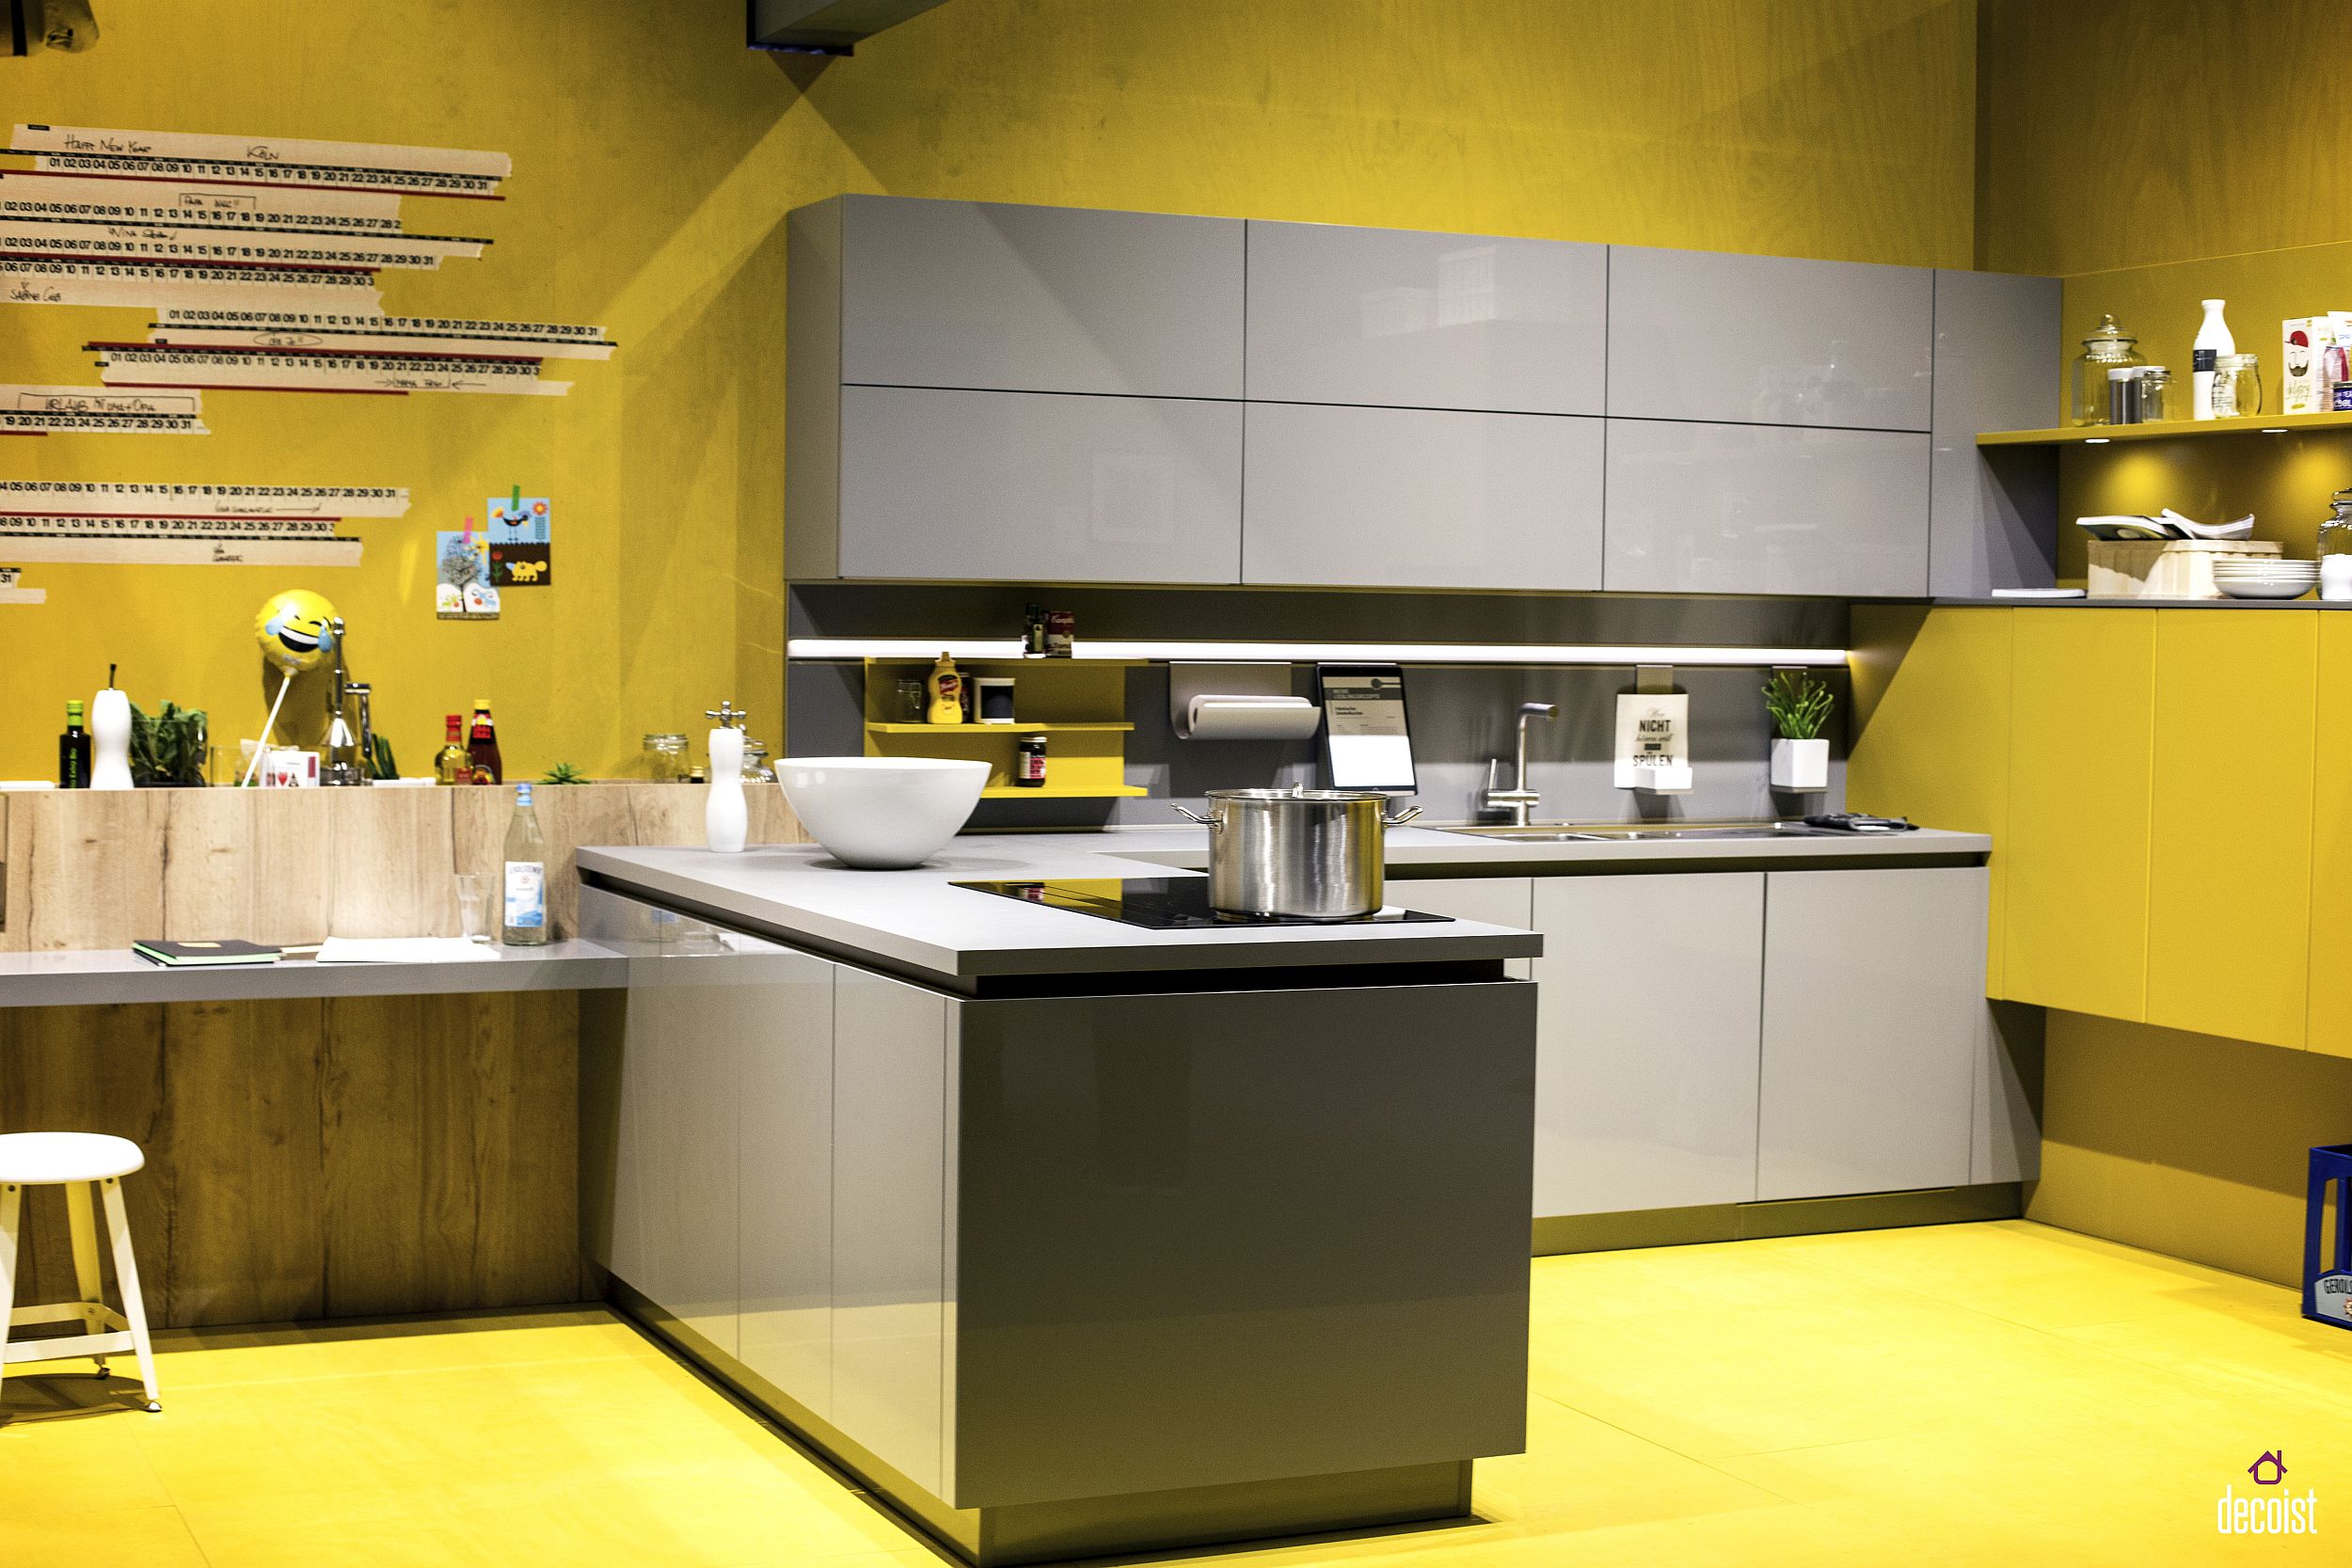 Cheerful kitchen in yellow and gray with modular shelving